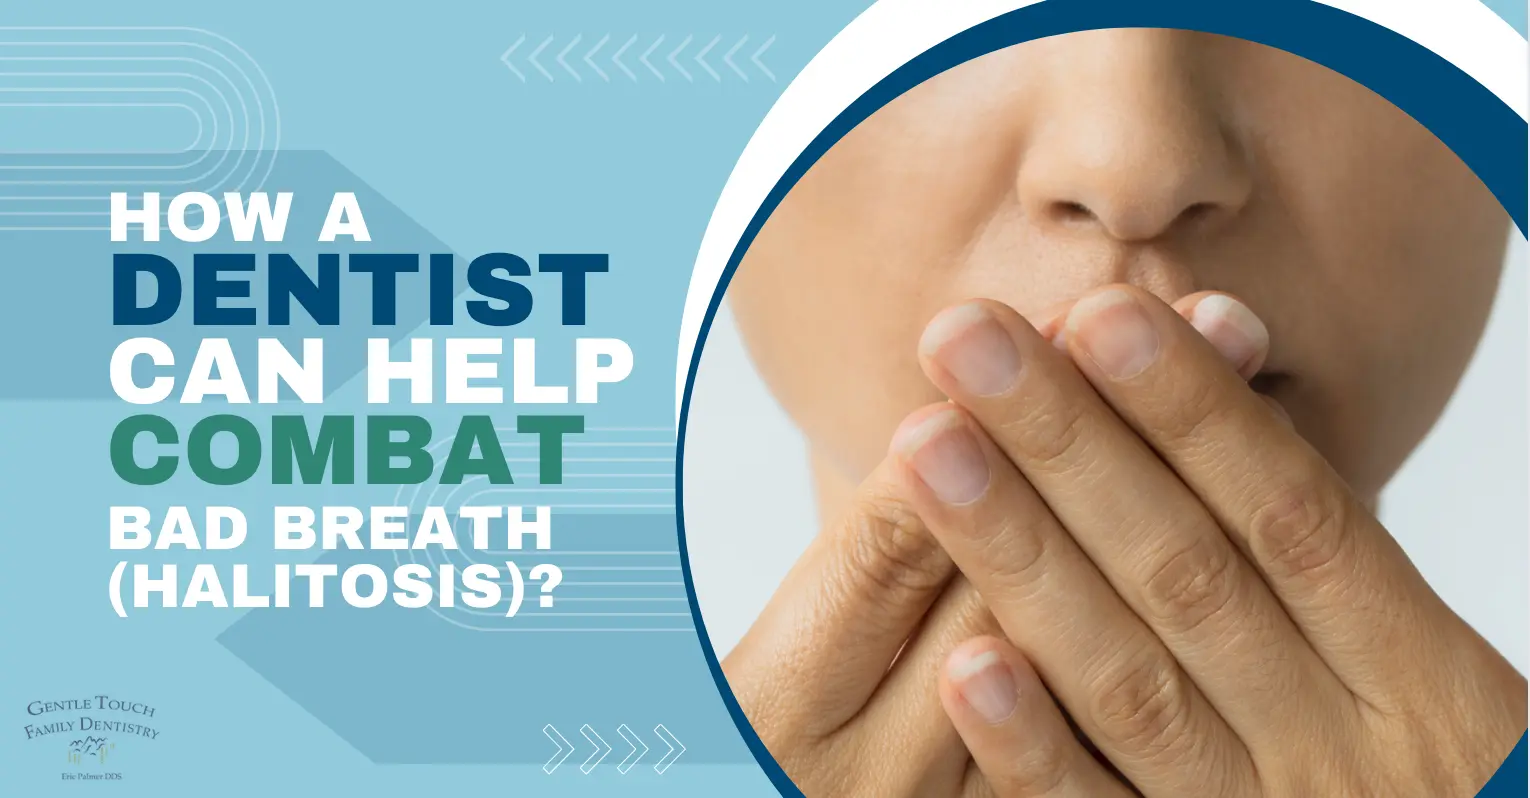 How a Dentist Can Help Combat Bad Breath (Halitosis)